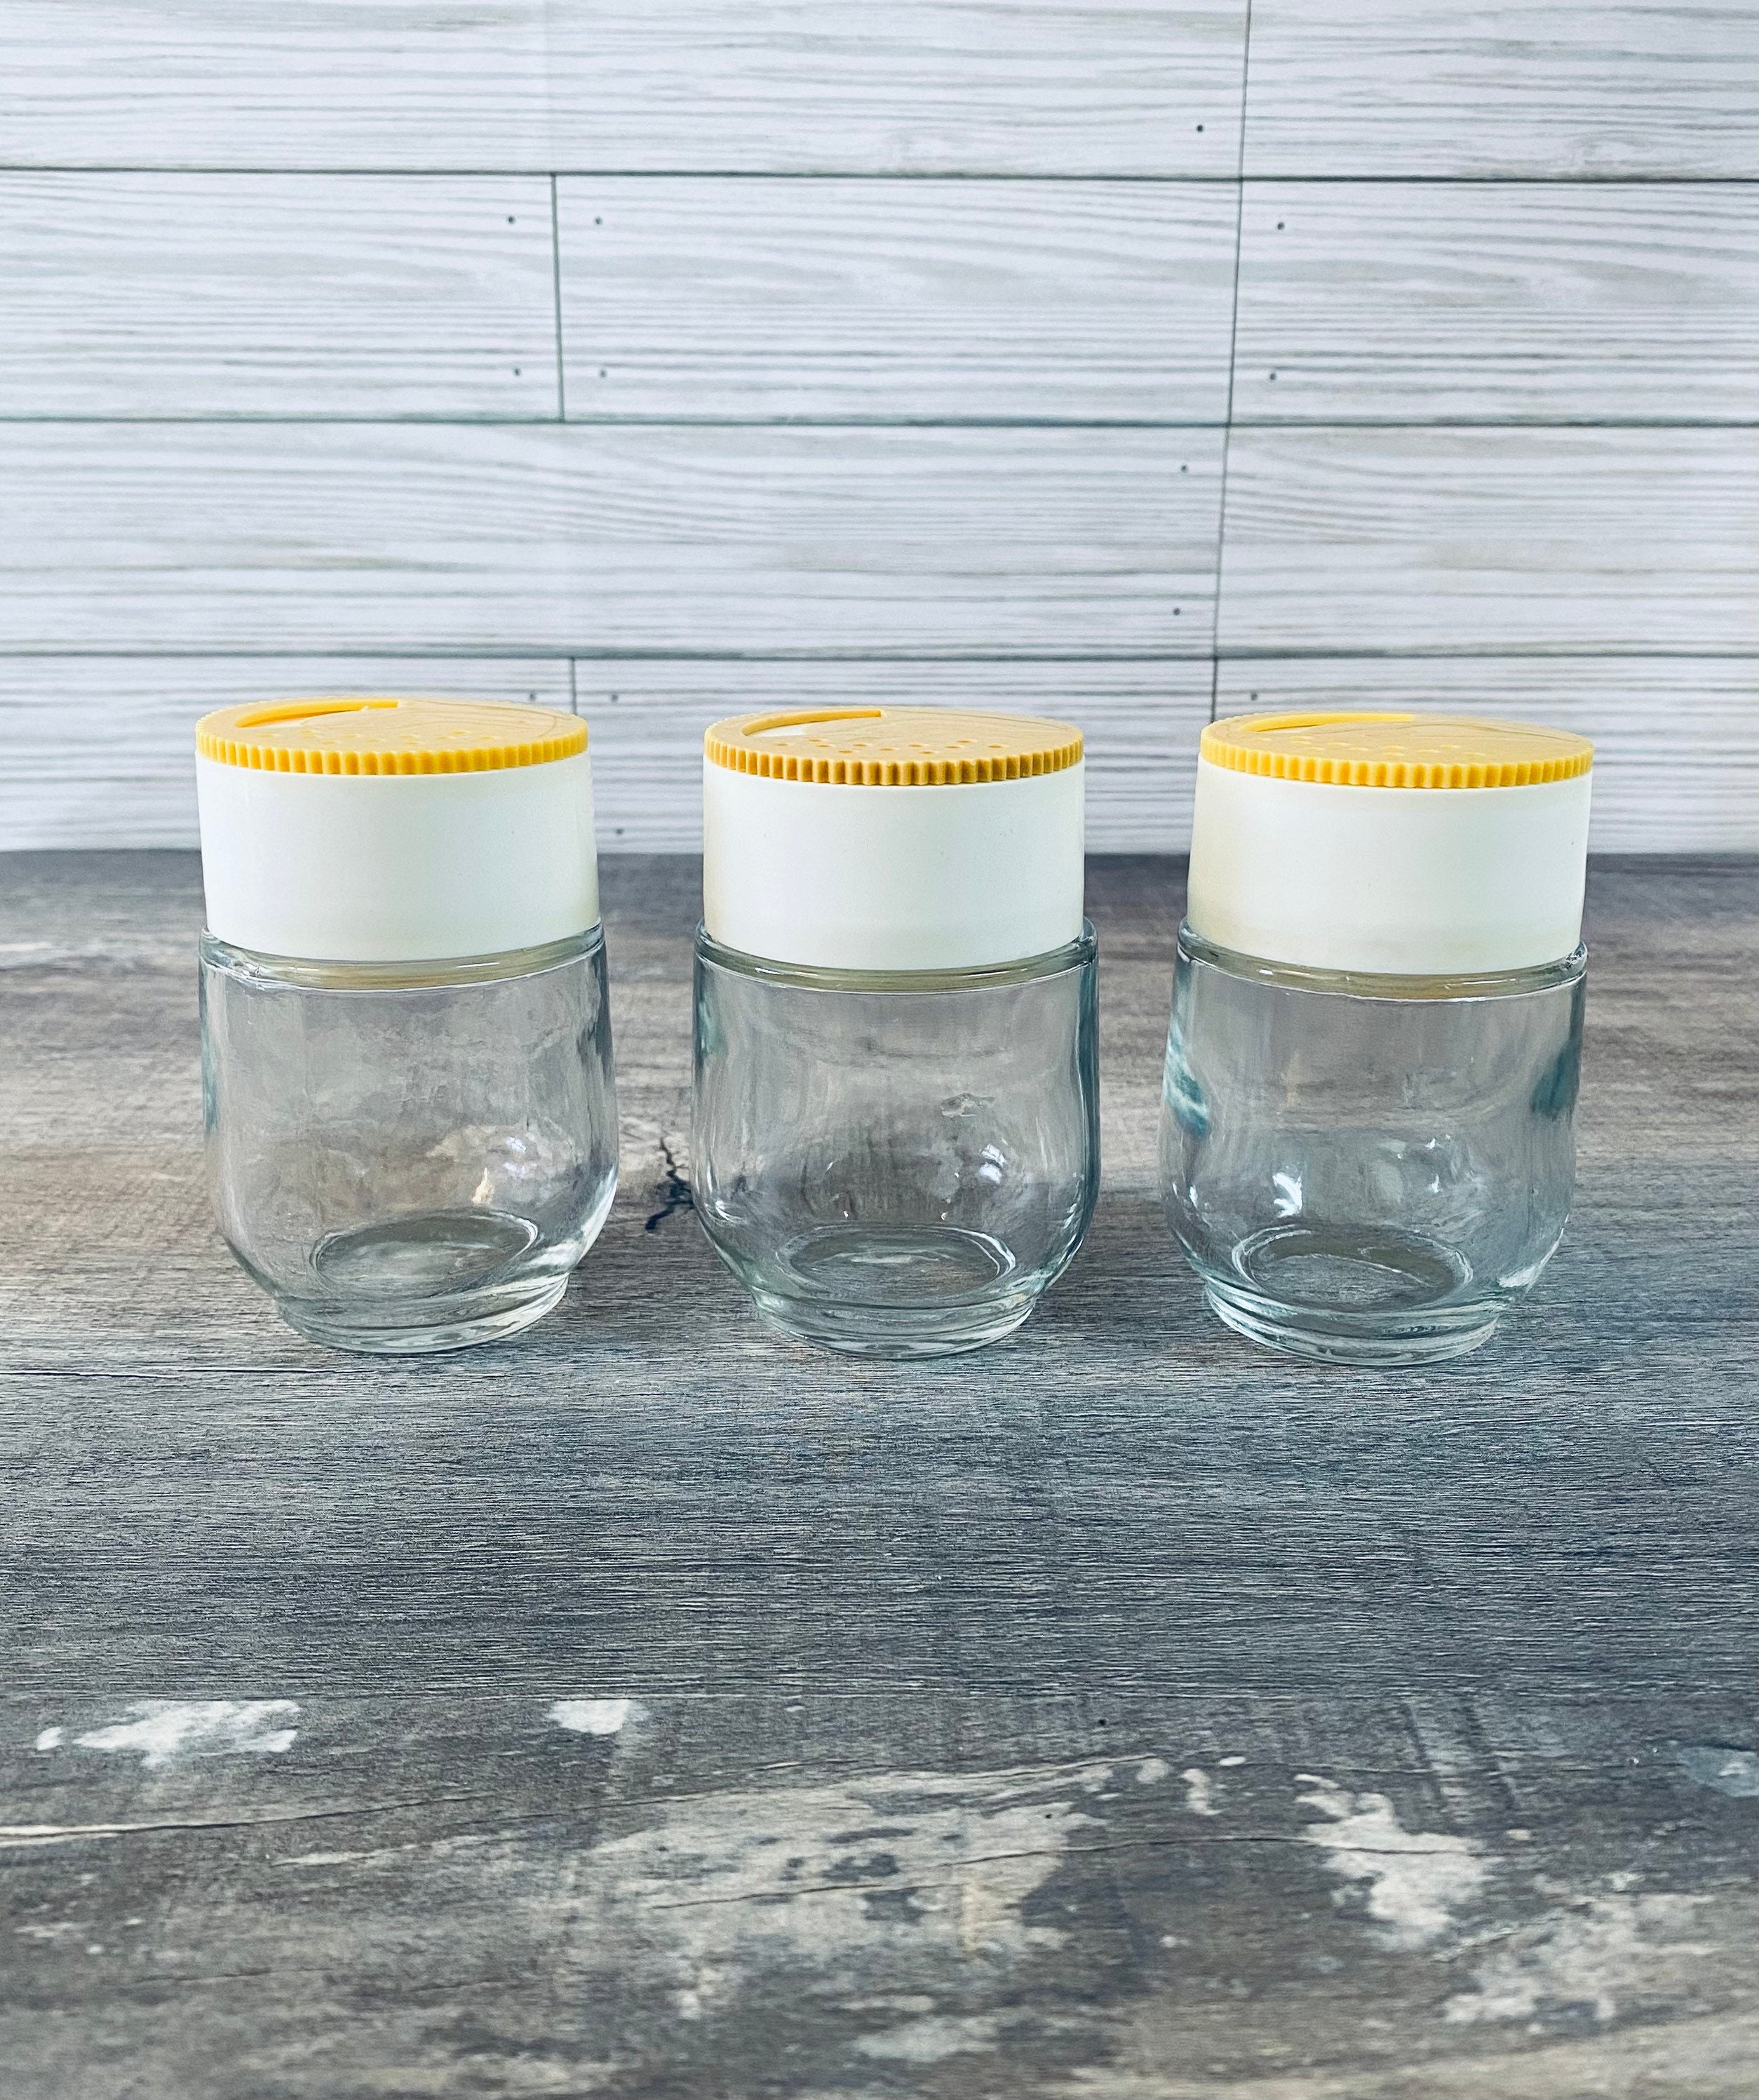 SpiceLuxe 8 oz Spice Jars with Lids - Square Clear Glass Spice Bottles with  Airtight Caps (8 Pack, Black cap)